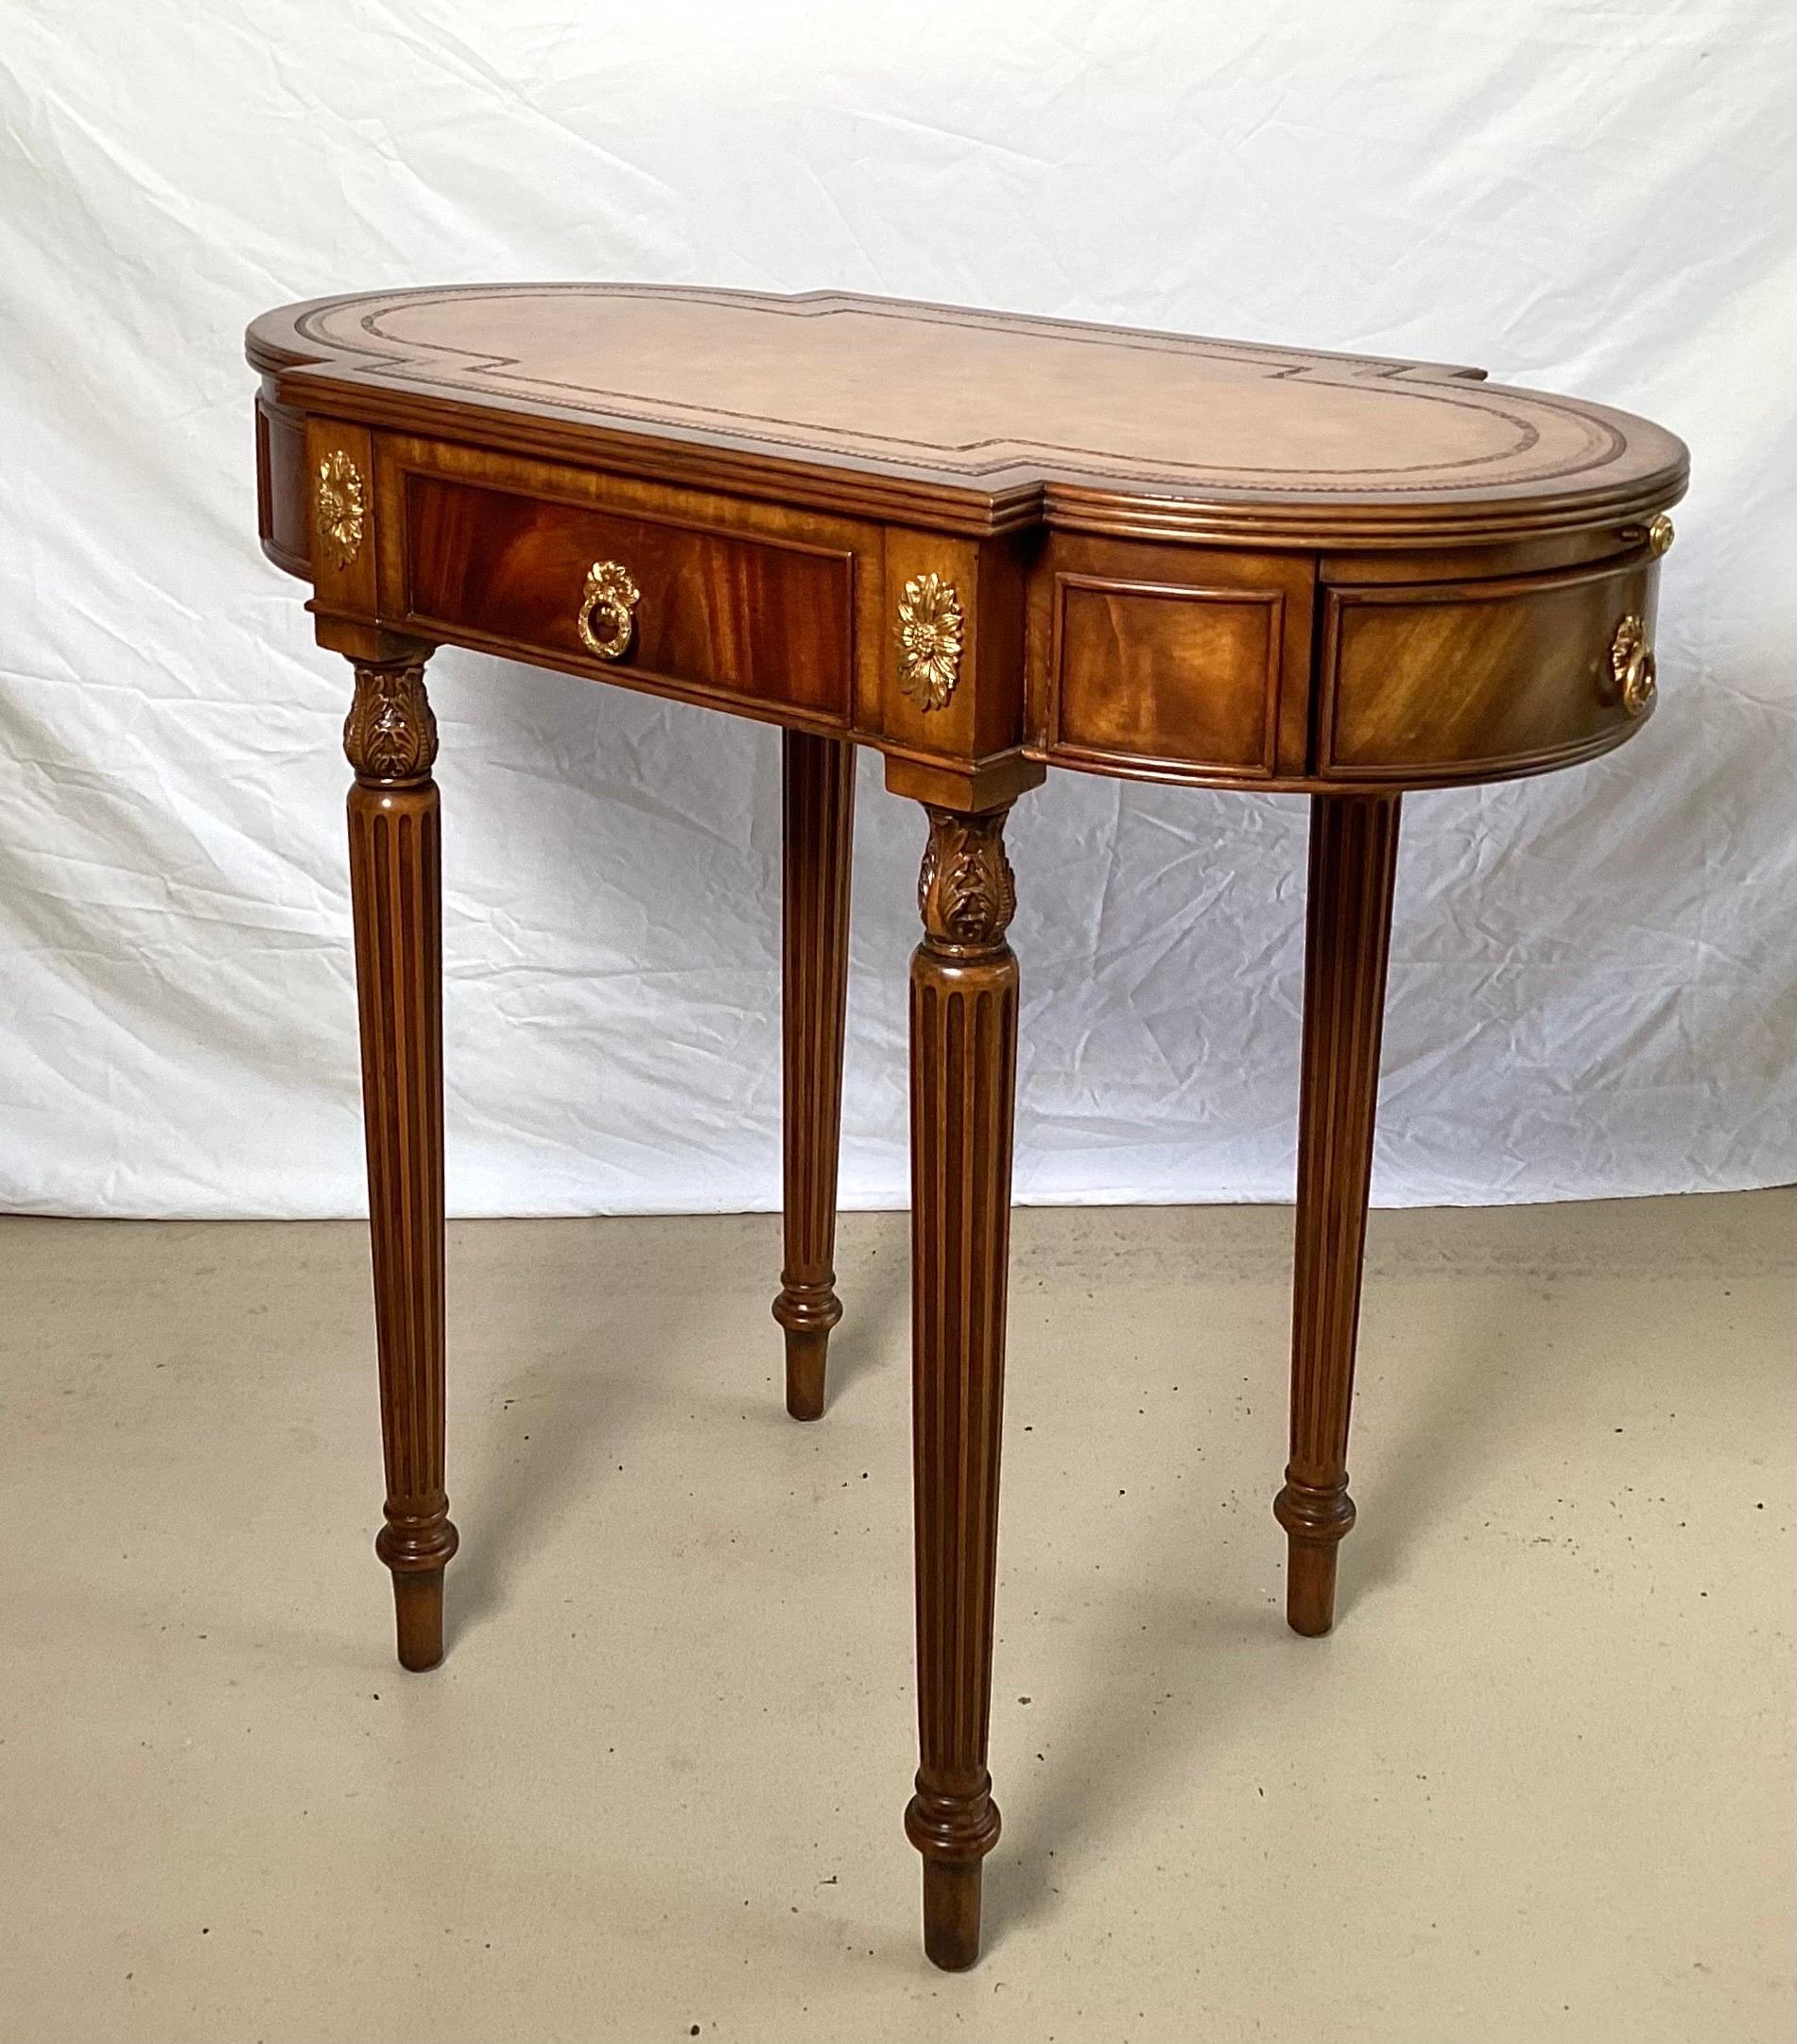 Unknown Oval Walnut and Mahogany Accent Work Table with Leather Top by Maitland Smith